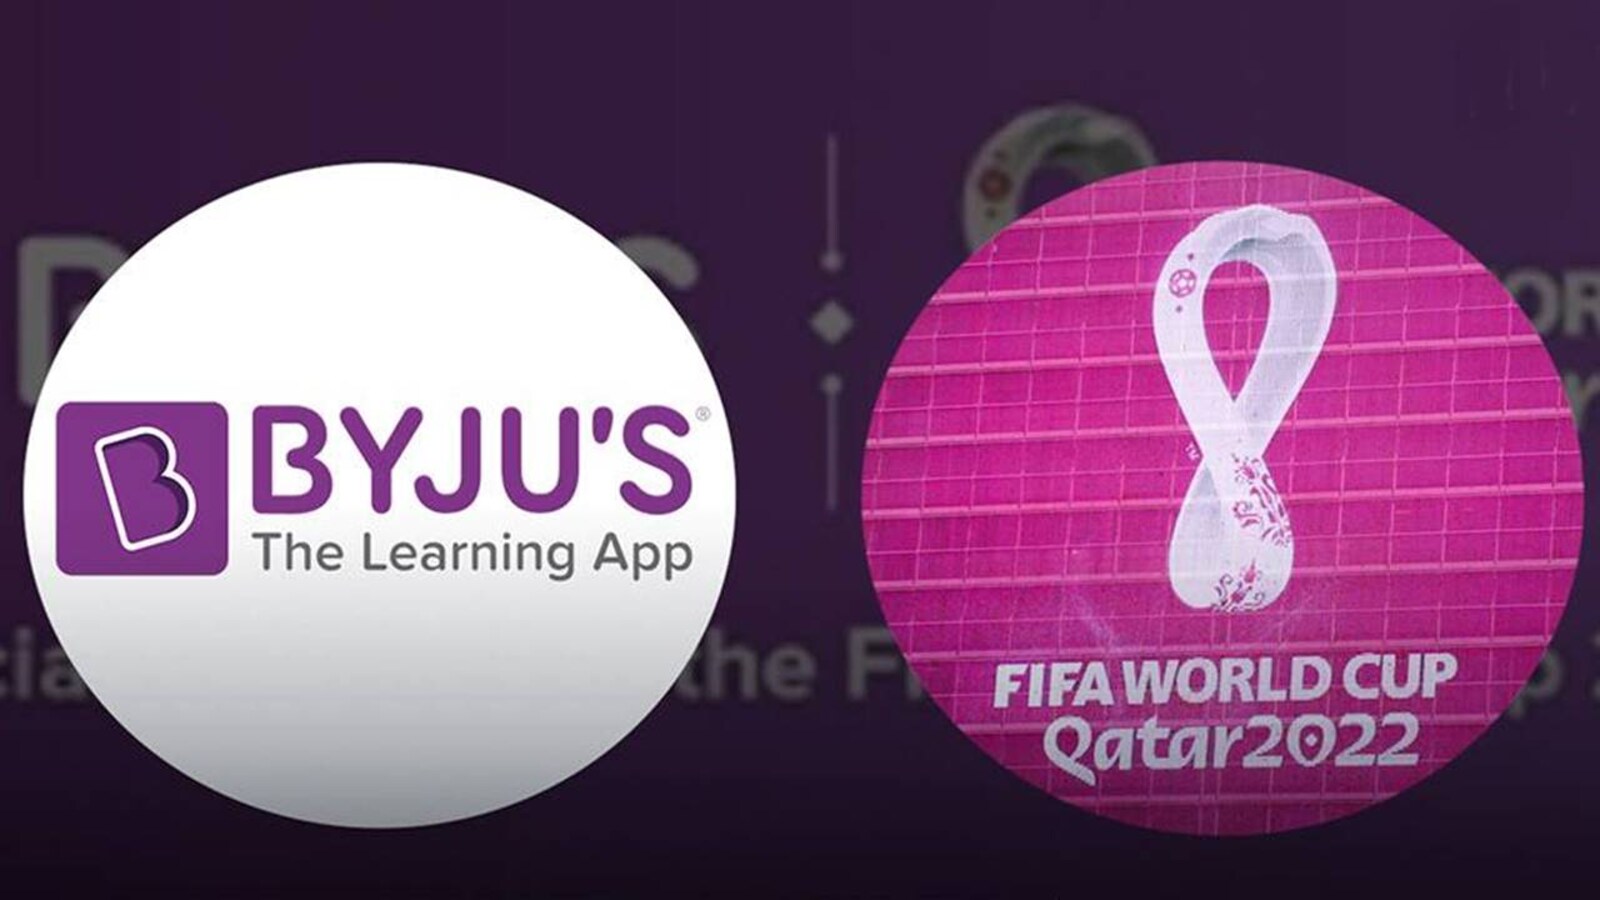 BYJU'S becomes an Official Sponsor of FIFA World Cup Qatar 2022